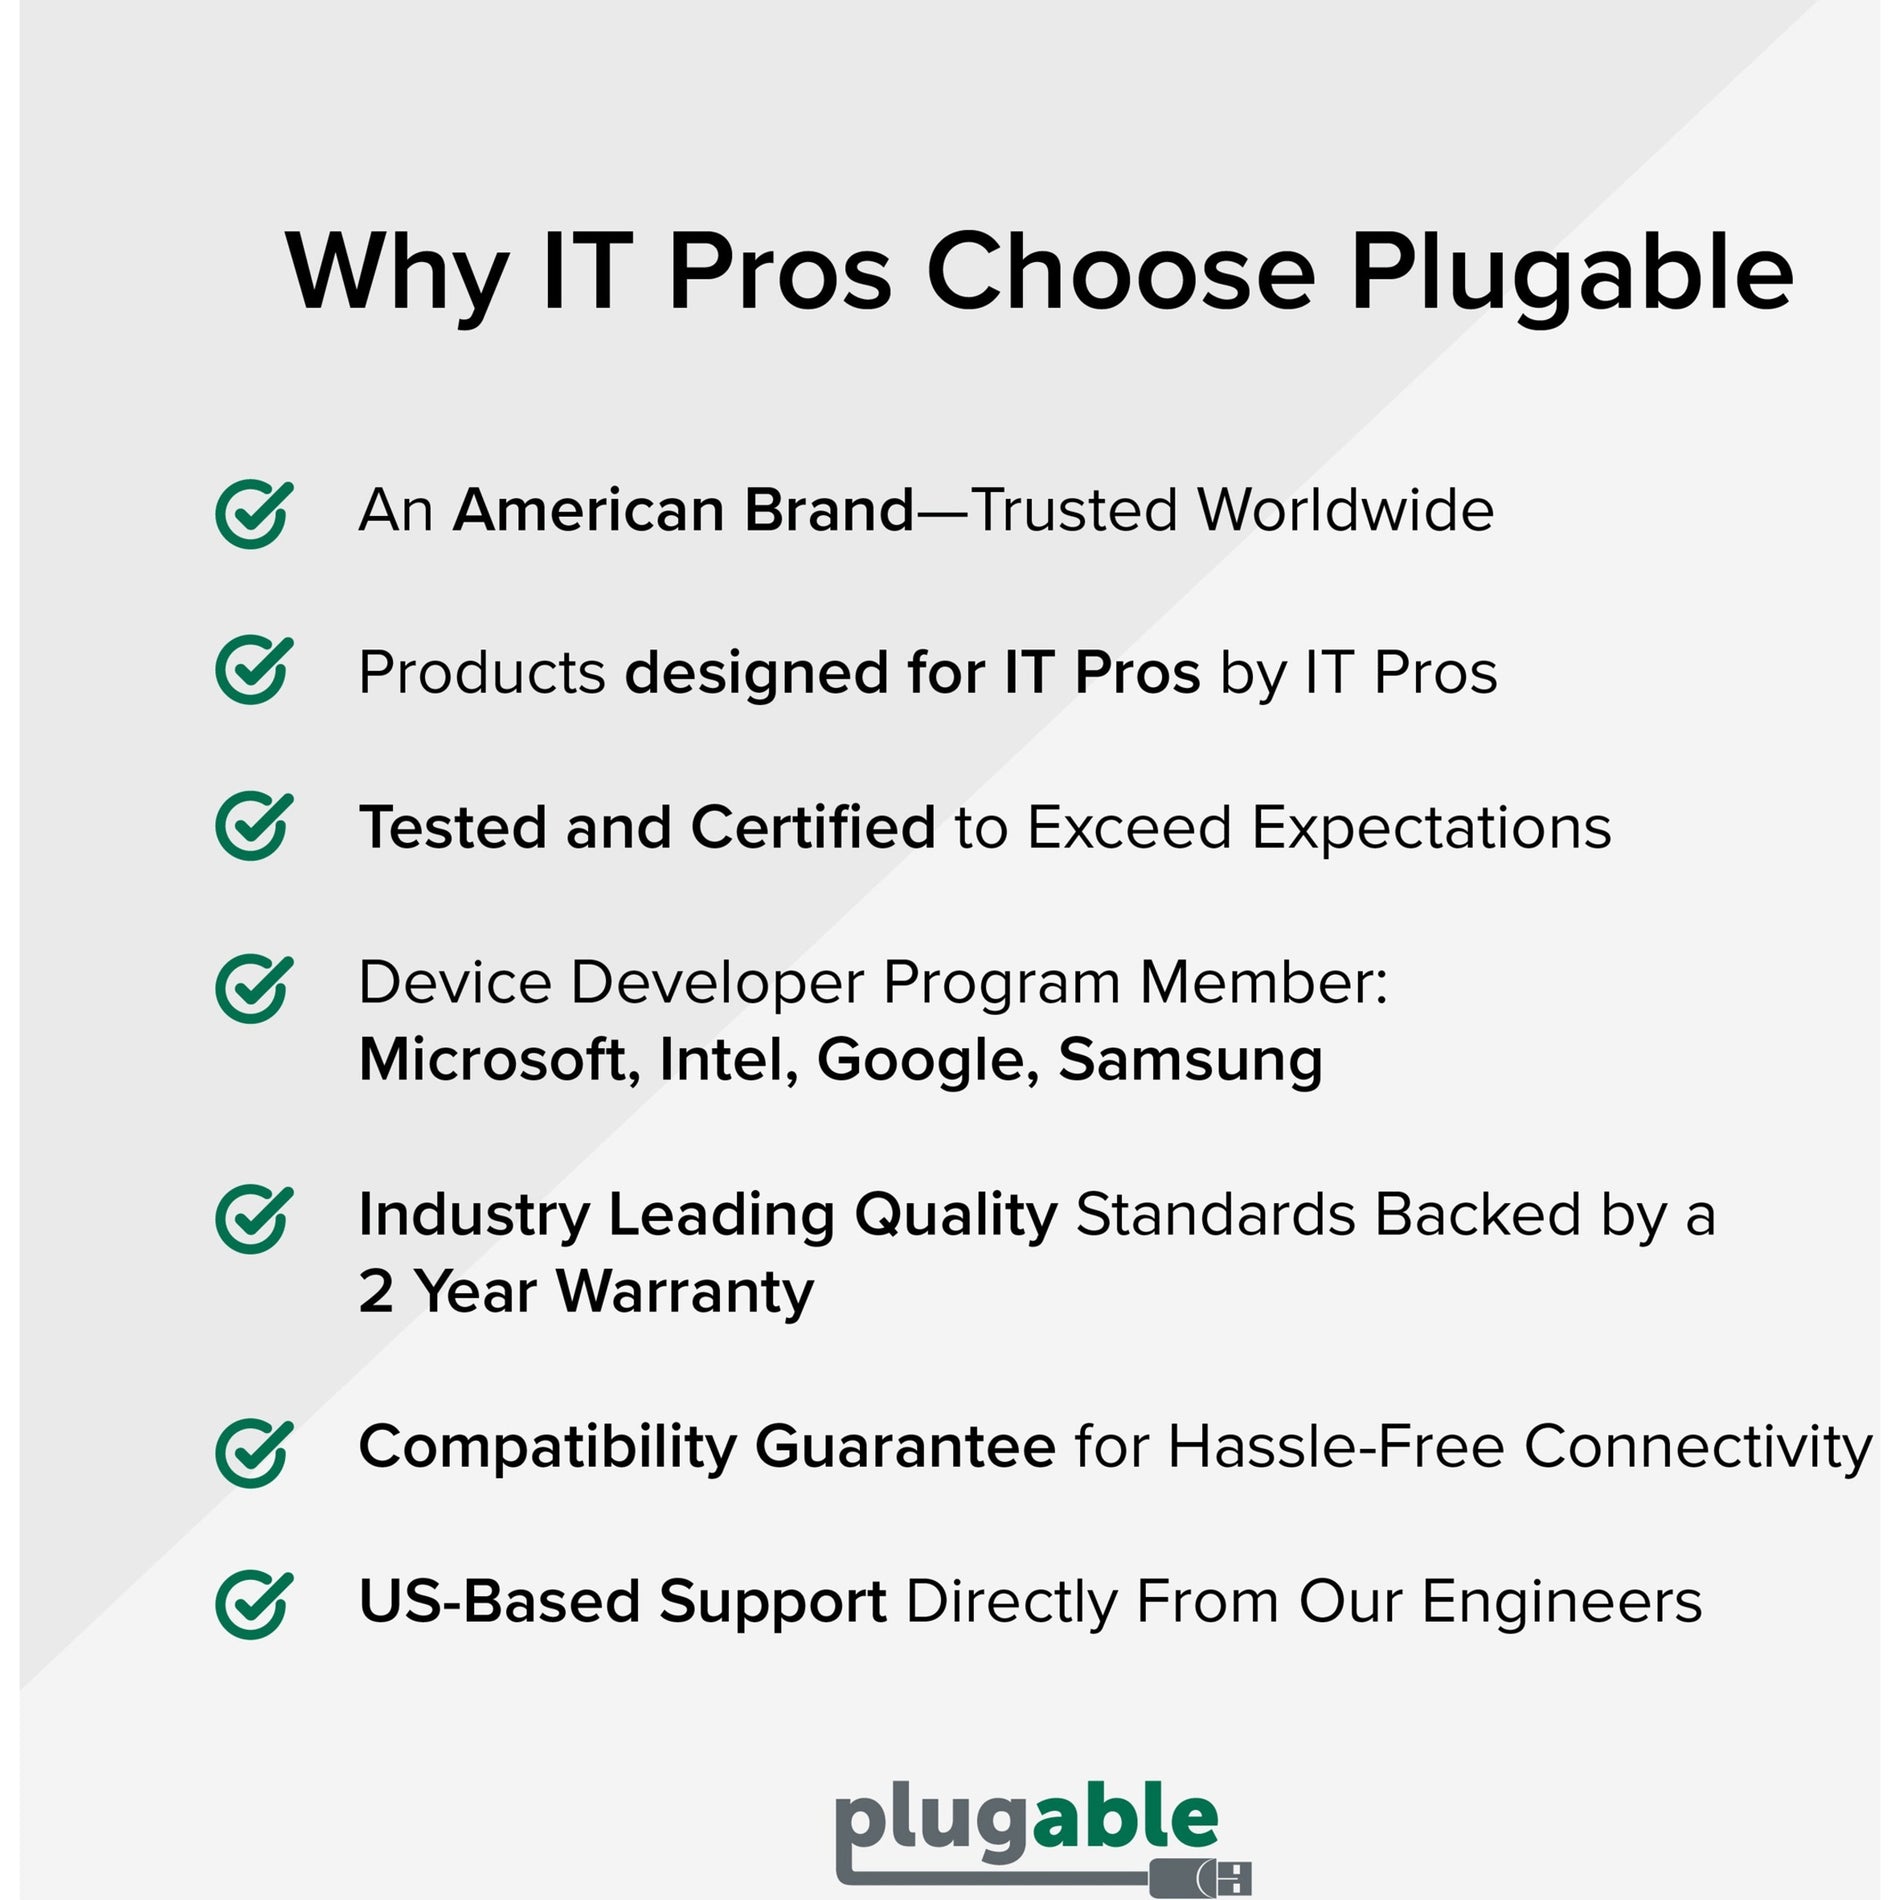 Plugable USB3-10M-D USB Extension Cable with Back-Voltage Protection - USB 3.0, 33ft (10m), Long Range, Power Adapter Included